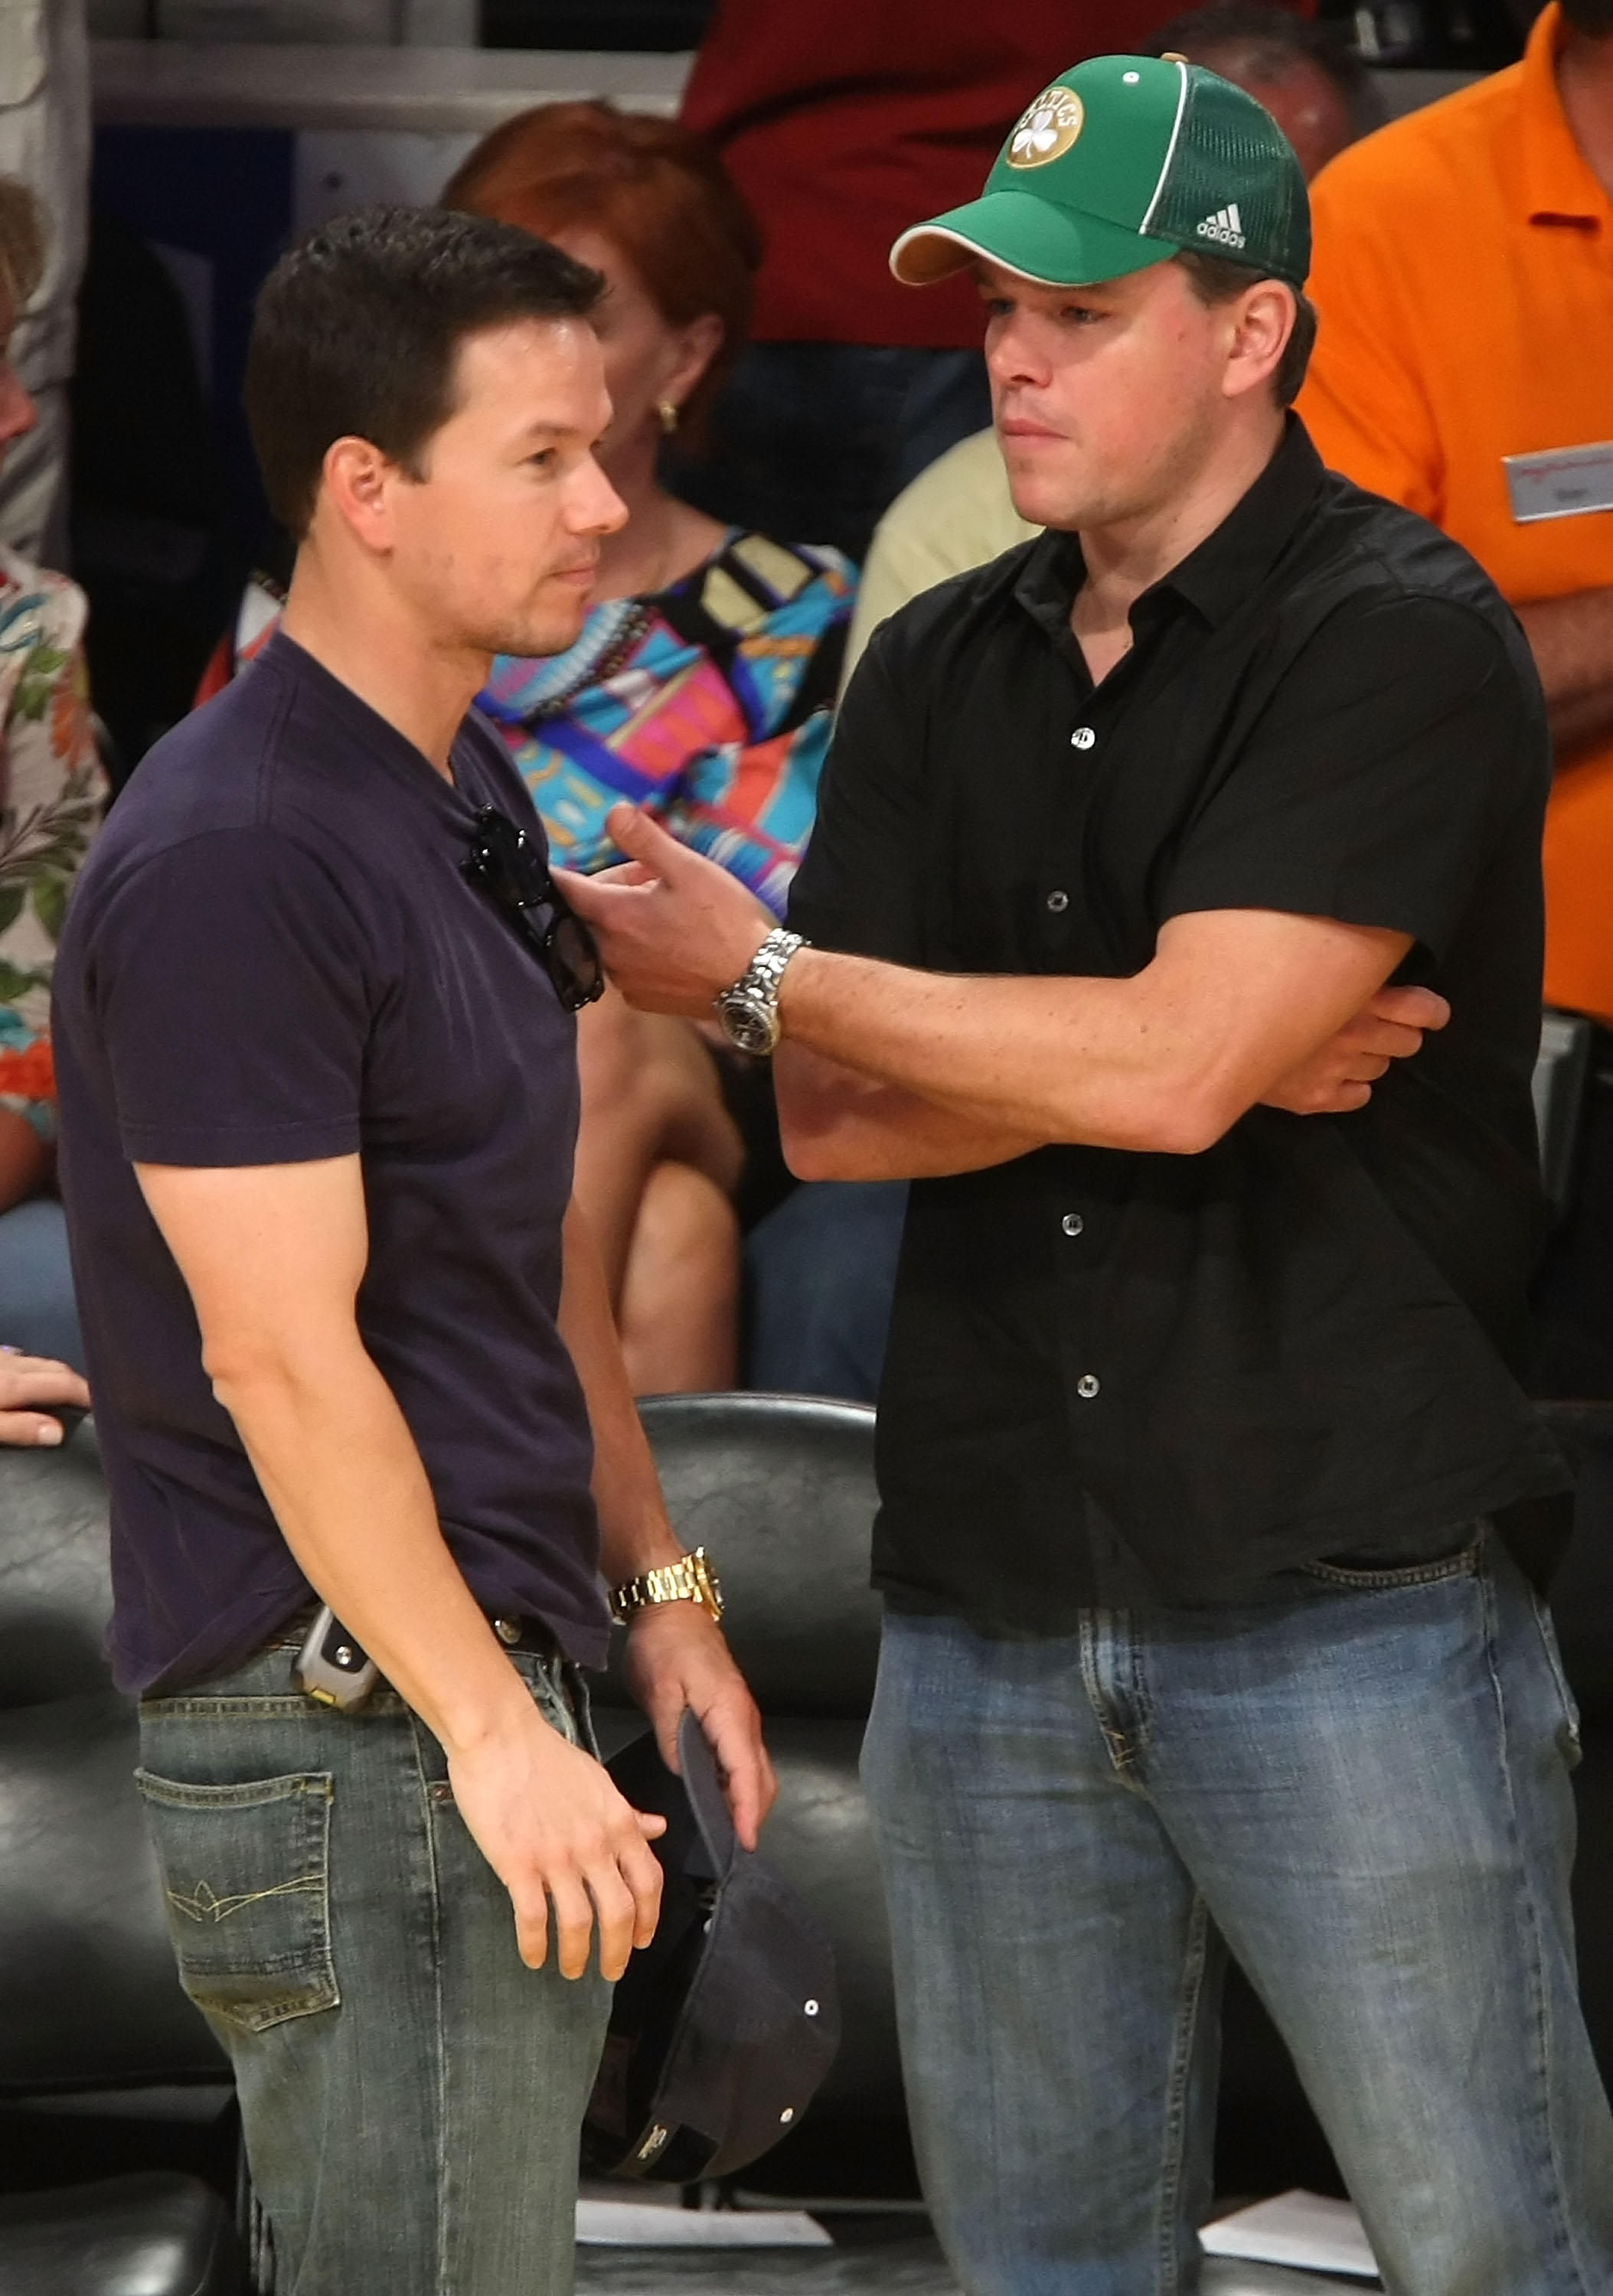 Actors Mark Wahlberg and Matt Damon attend Game Five of the 2008 NBA Finals between the Los Angeles Lakers and the Boston Celtics on June 15, 2008 at Staples Center in Los Angeles, California. | Source: Getty Images